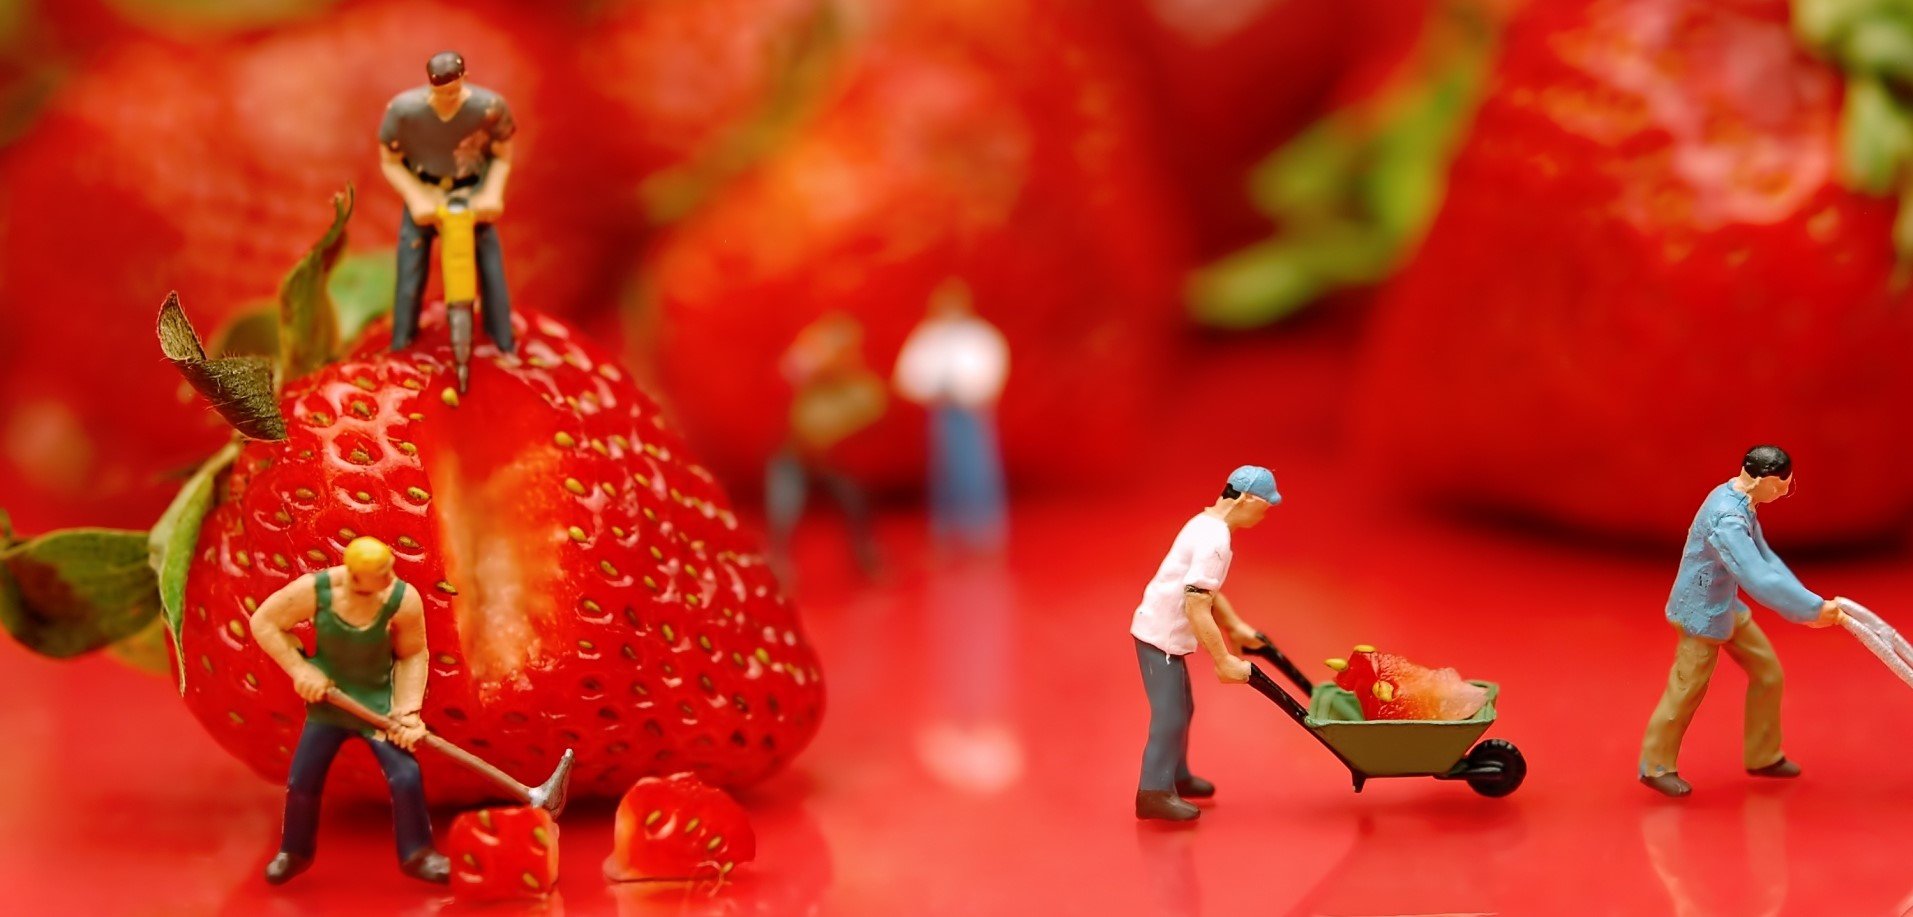 strawberry workers - Should I Eat Fruit? Is Fruit Good for You?